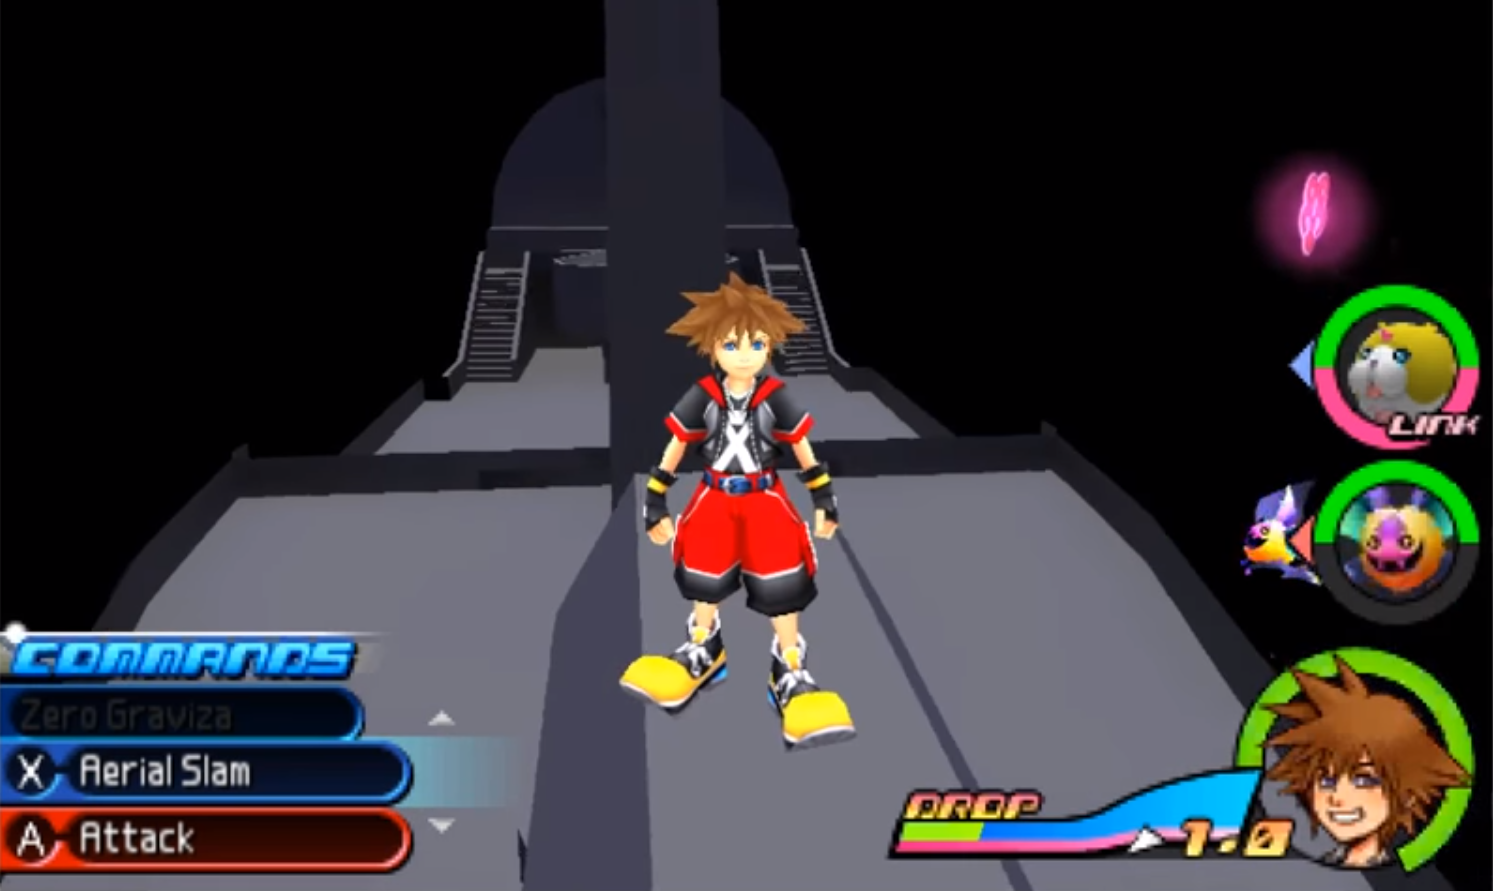 New hidden area discovered in Kingdom Hearts 3D: Dream Drop Distance code - Kingdom Hearts News - KH13 · for Kingdom Hearts